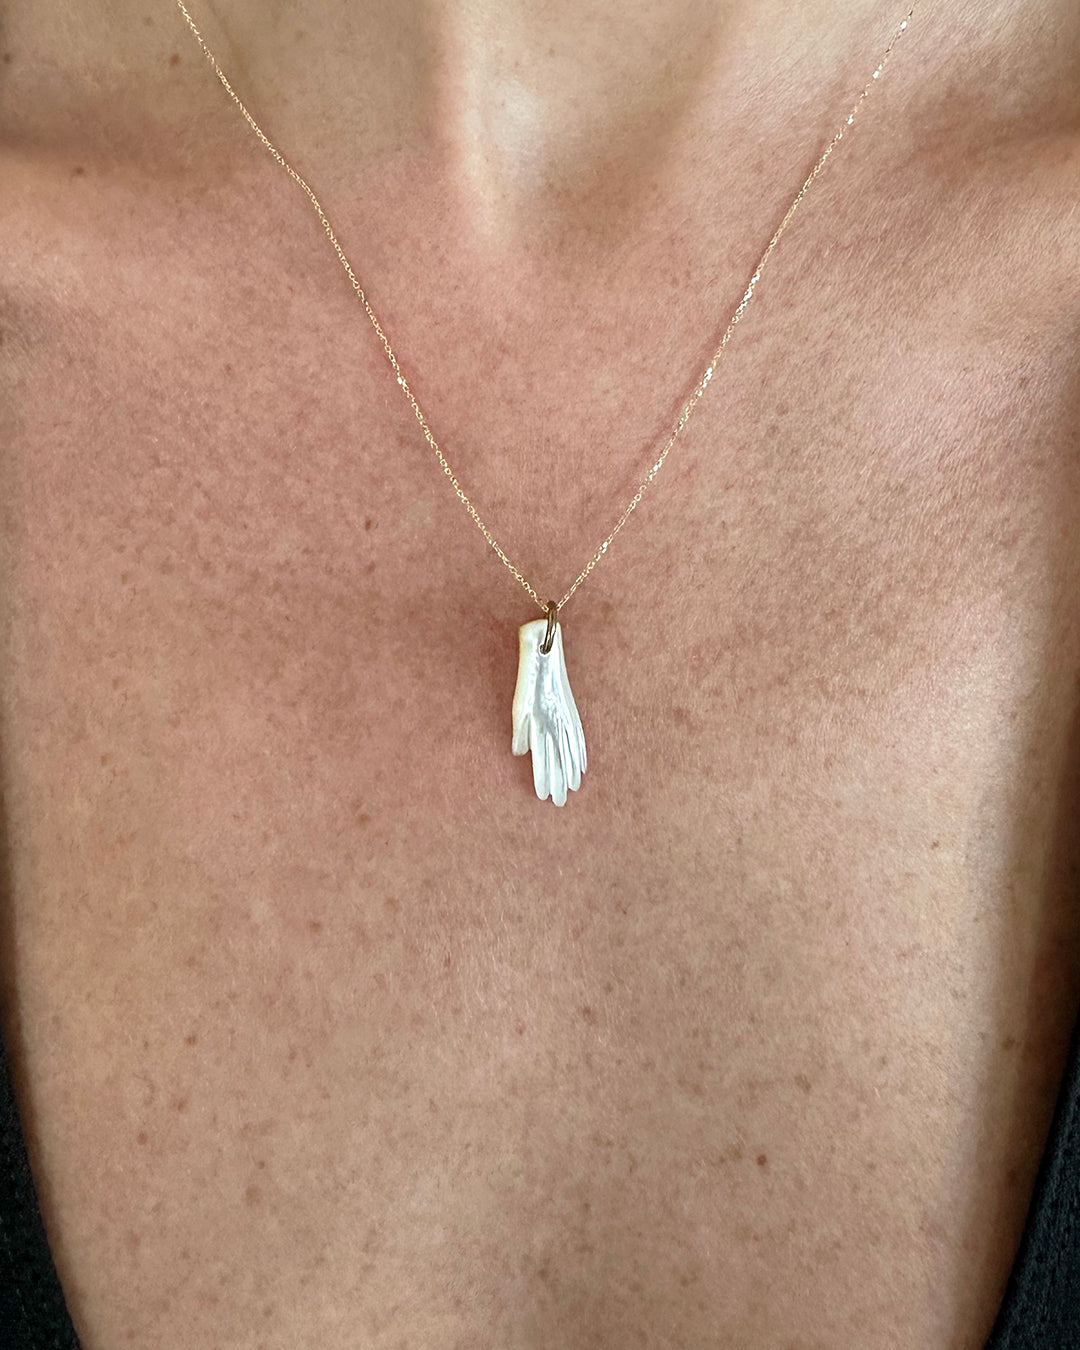 VICTORIAN MOTHER OF PEARL HAND PENDANT